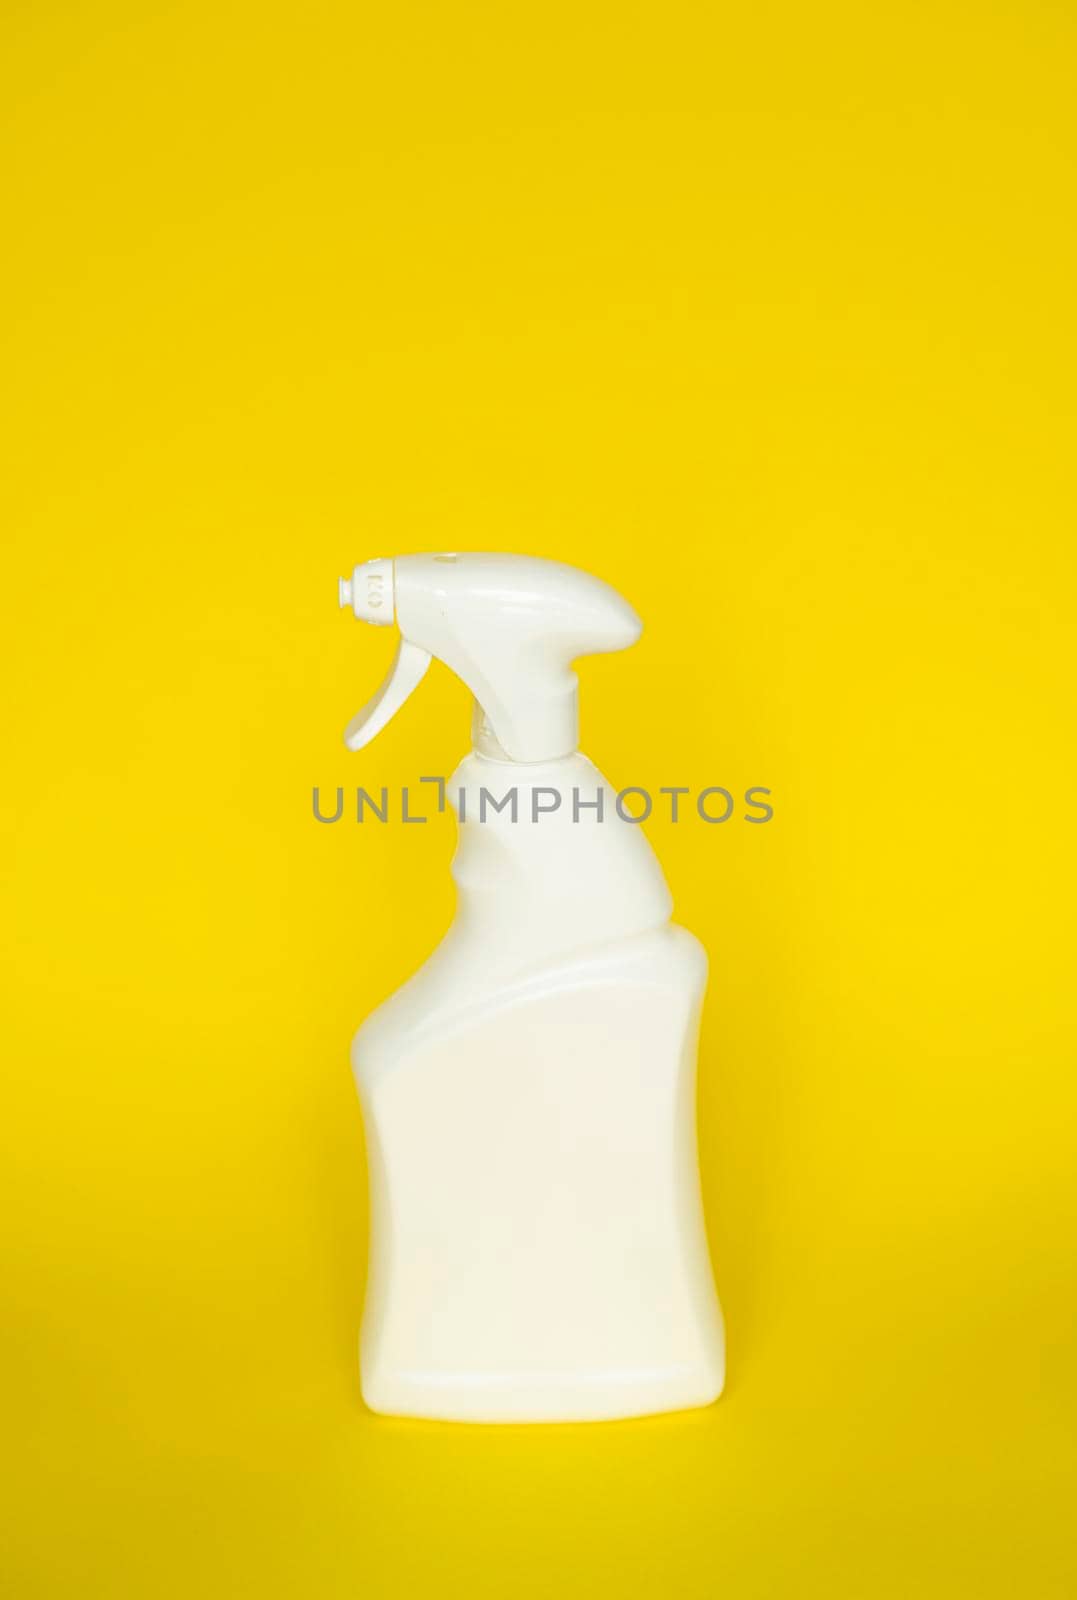 White detergent bottles or chemical cleaning supplies with a sprayer isolated on yellow background